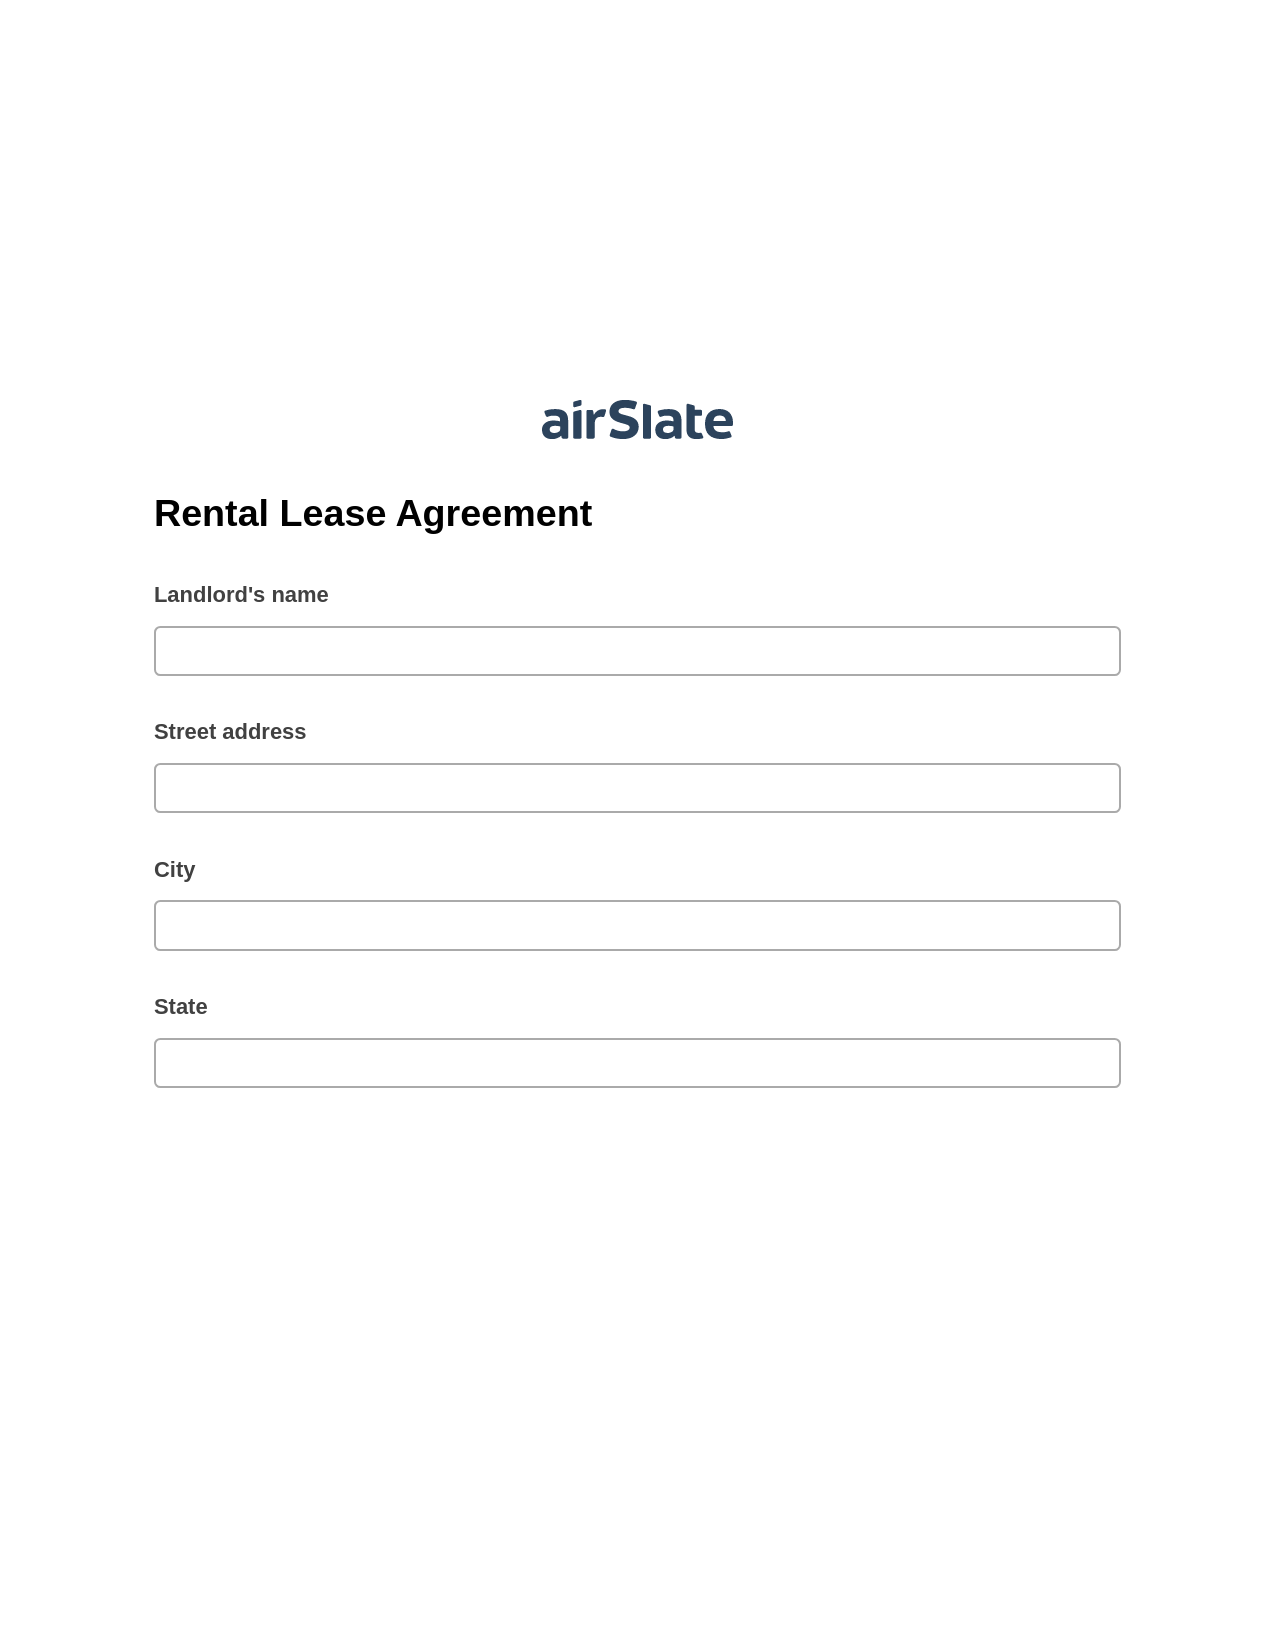 Multirole Rental Lease Agreement Pre-fill from Google Sheet Dropdown Options Bot, Open as Role Bot, Archive to SharePoint Folder Bot